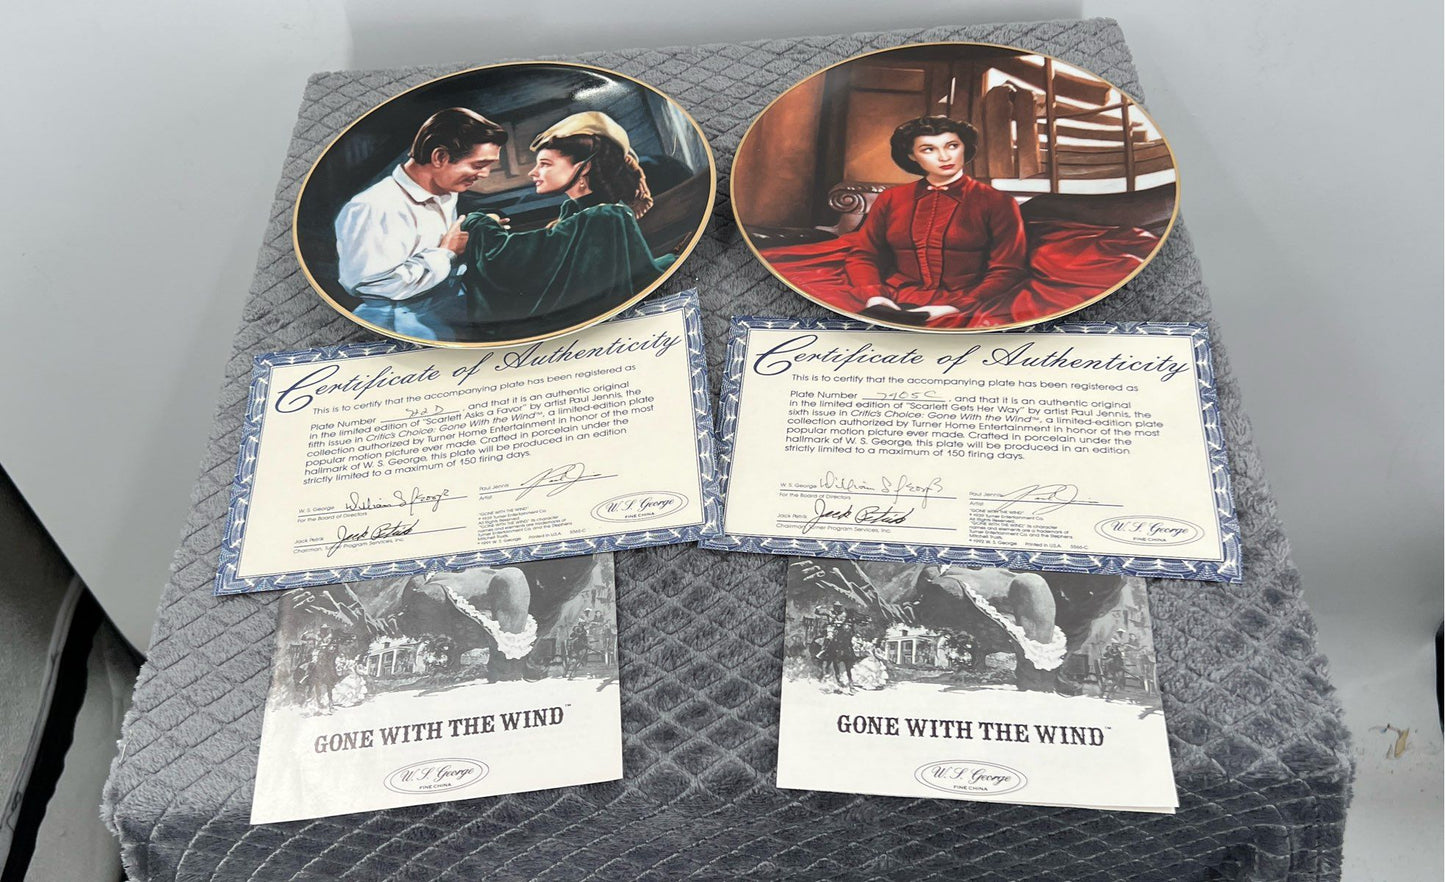 Gone With The Wind Collectors Plates Lot Of 2-W.S. George-1990s-5th & 6th Issue